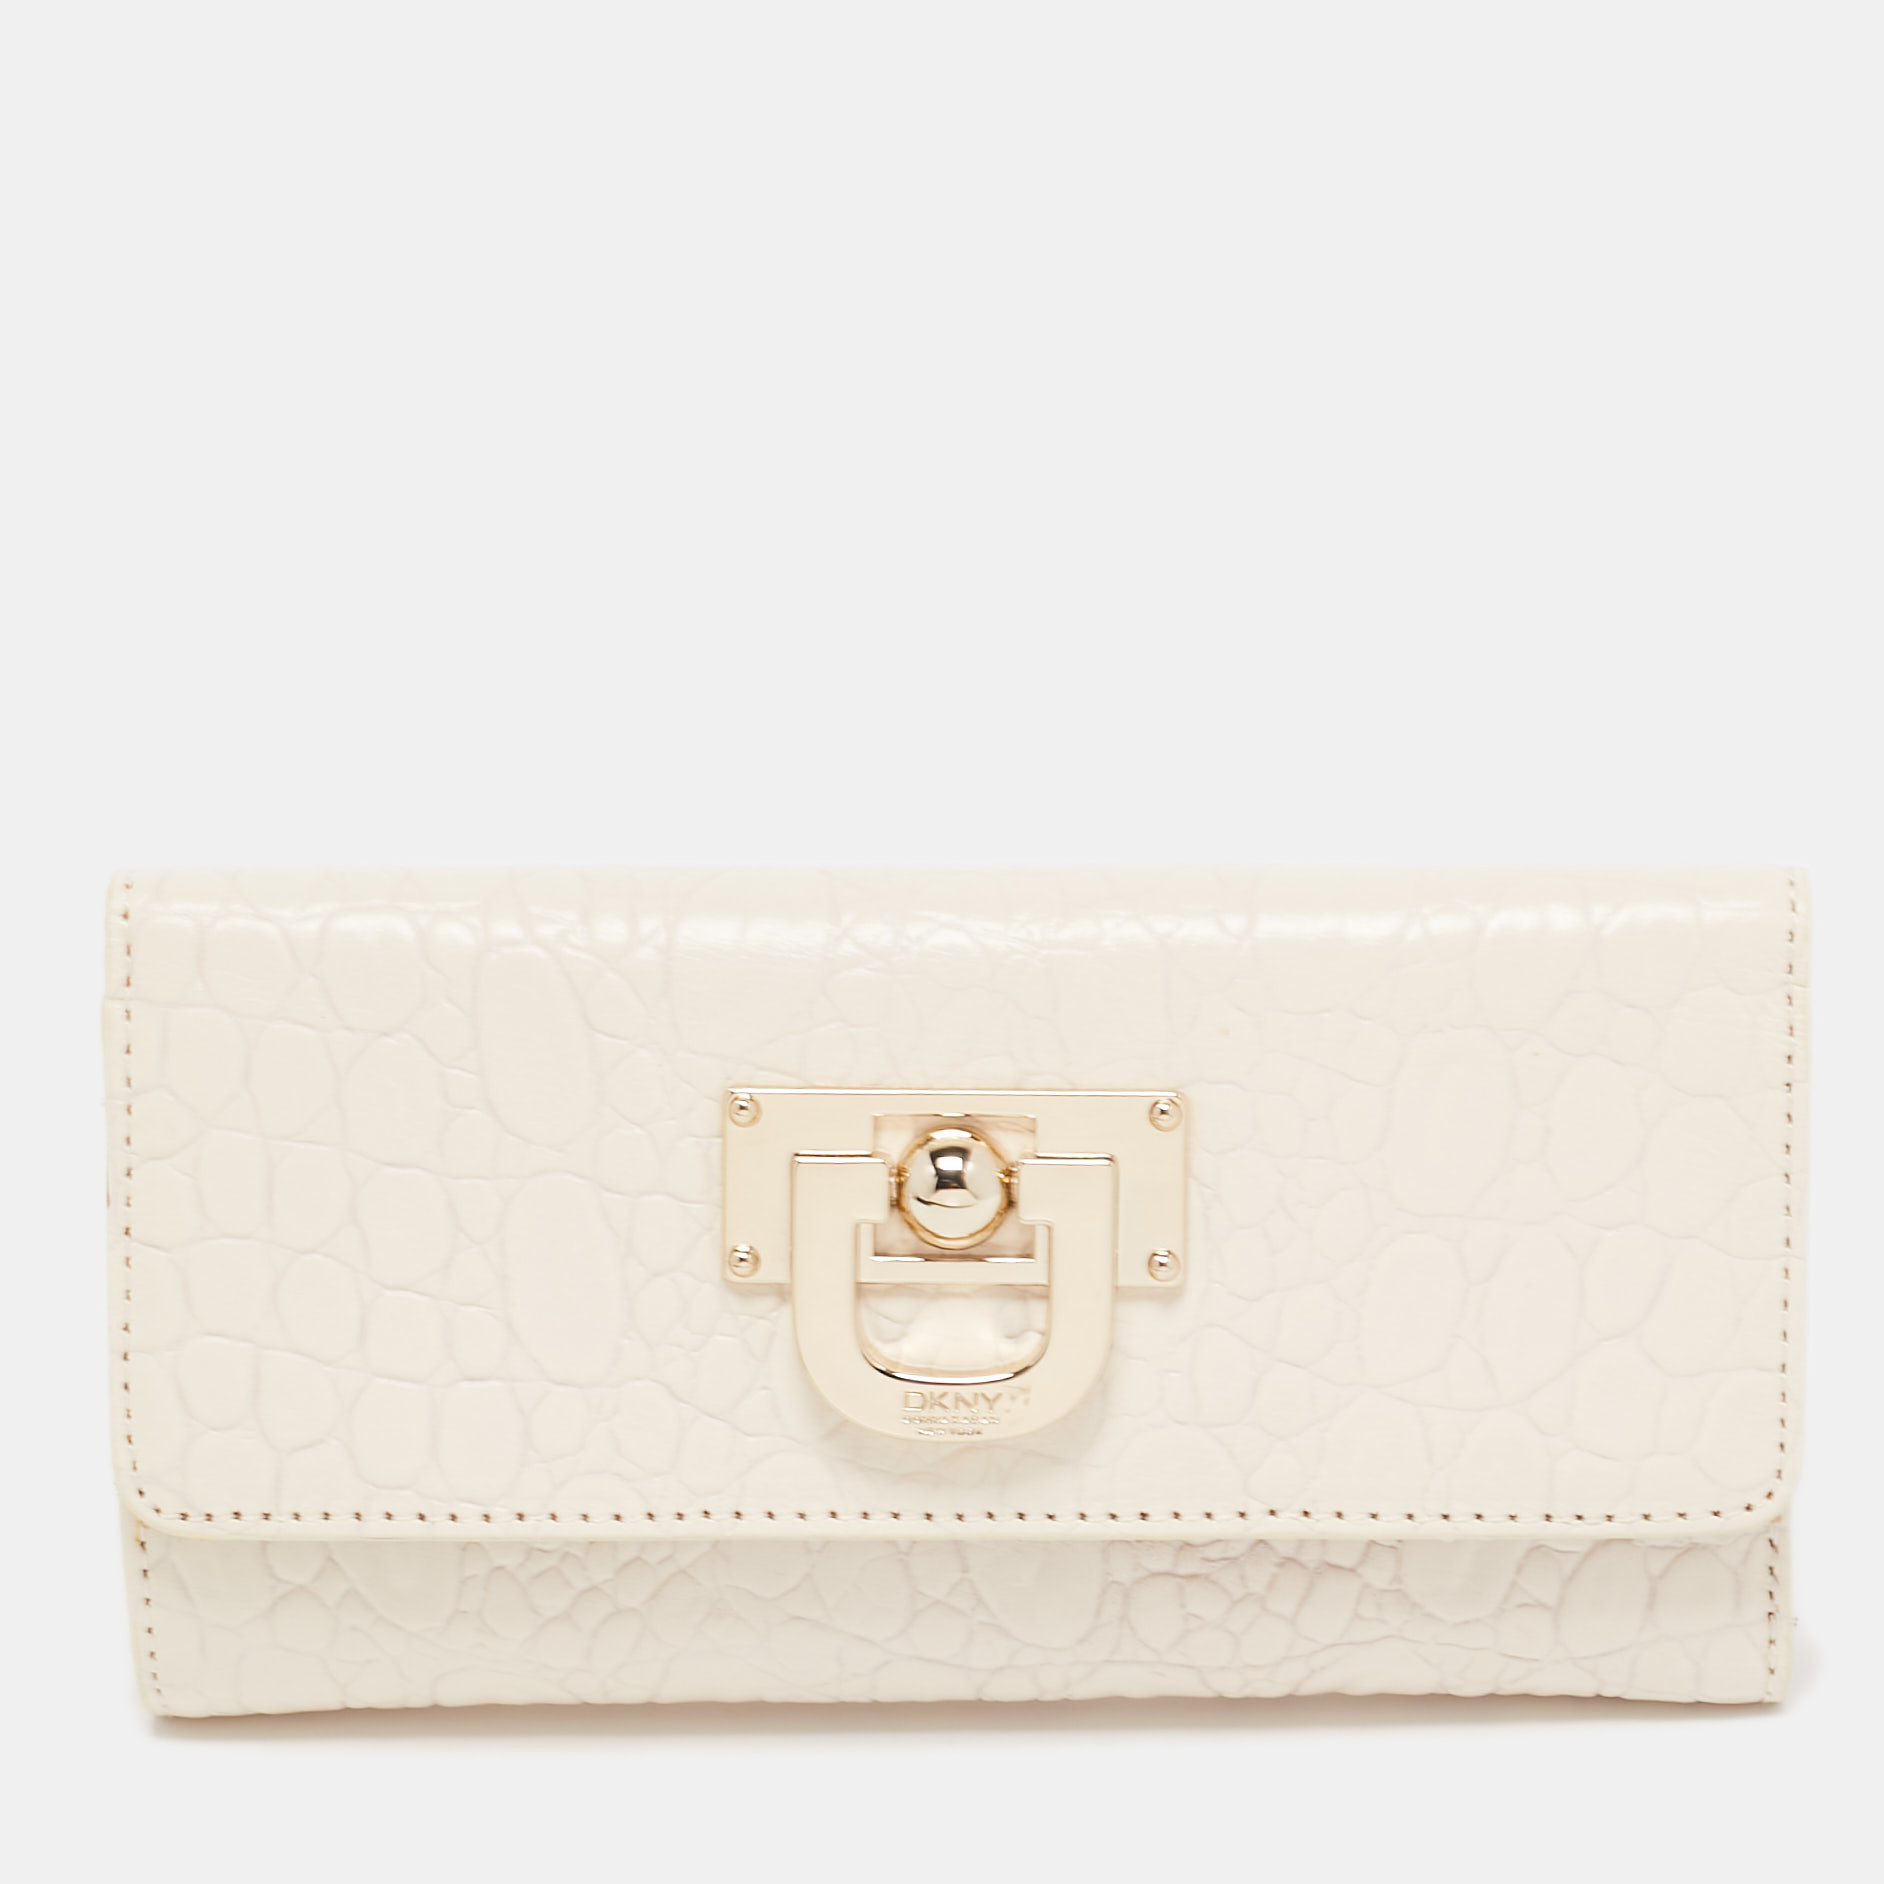 Pre-owned Dkny Off White Croc Embossed Leather Flap Continental Wallet